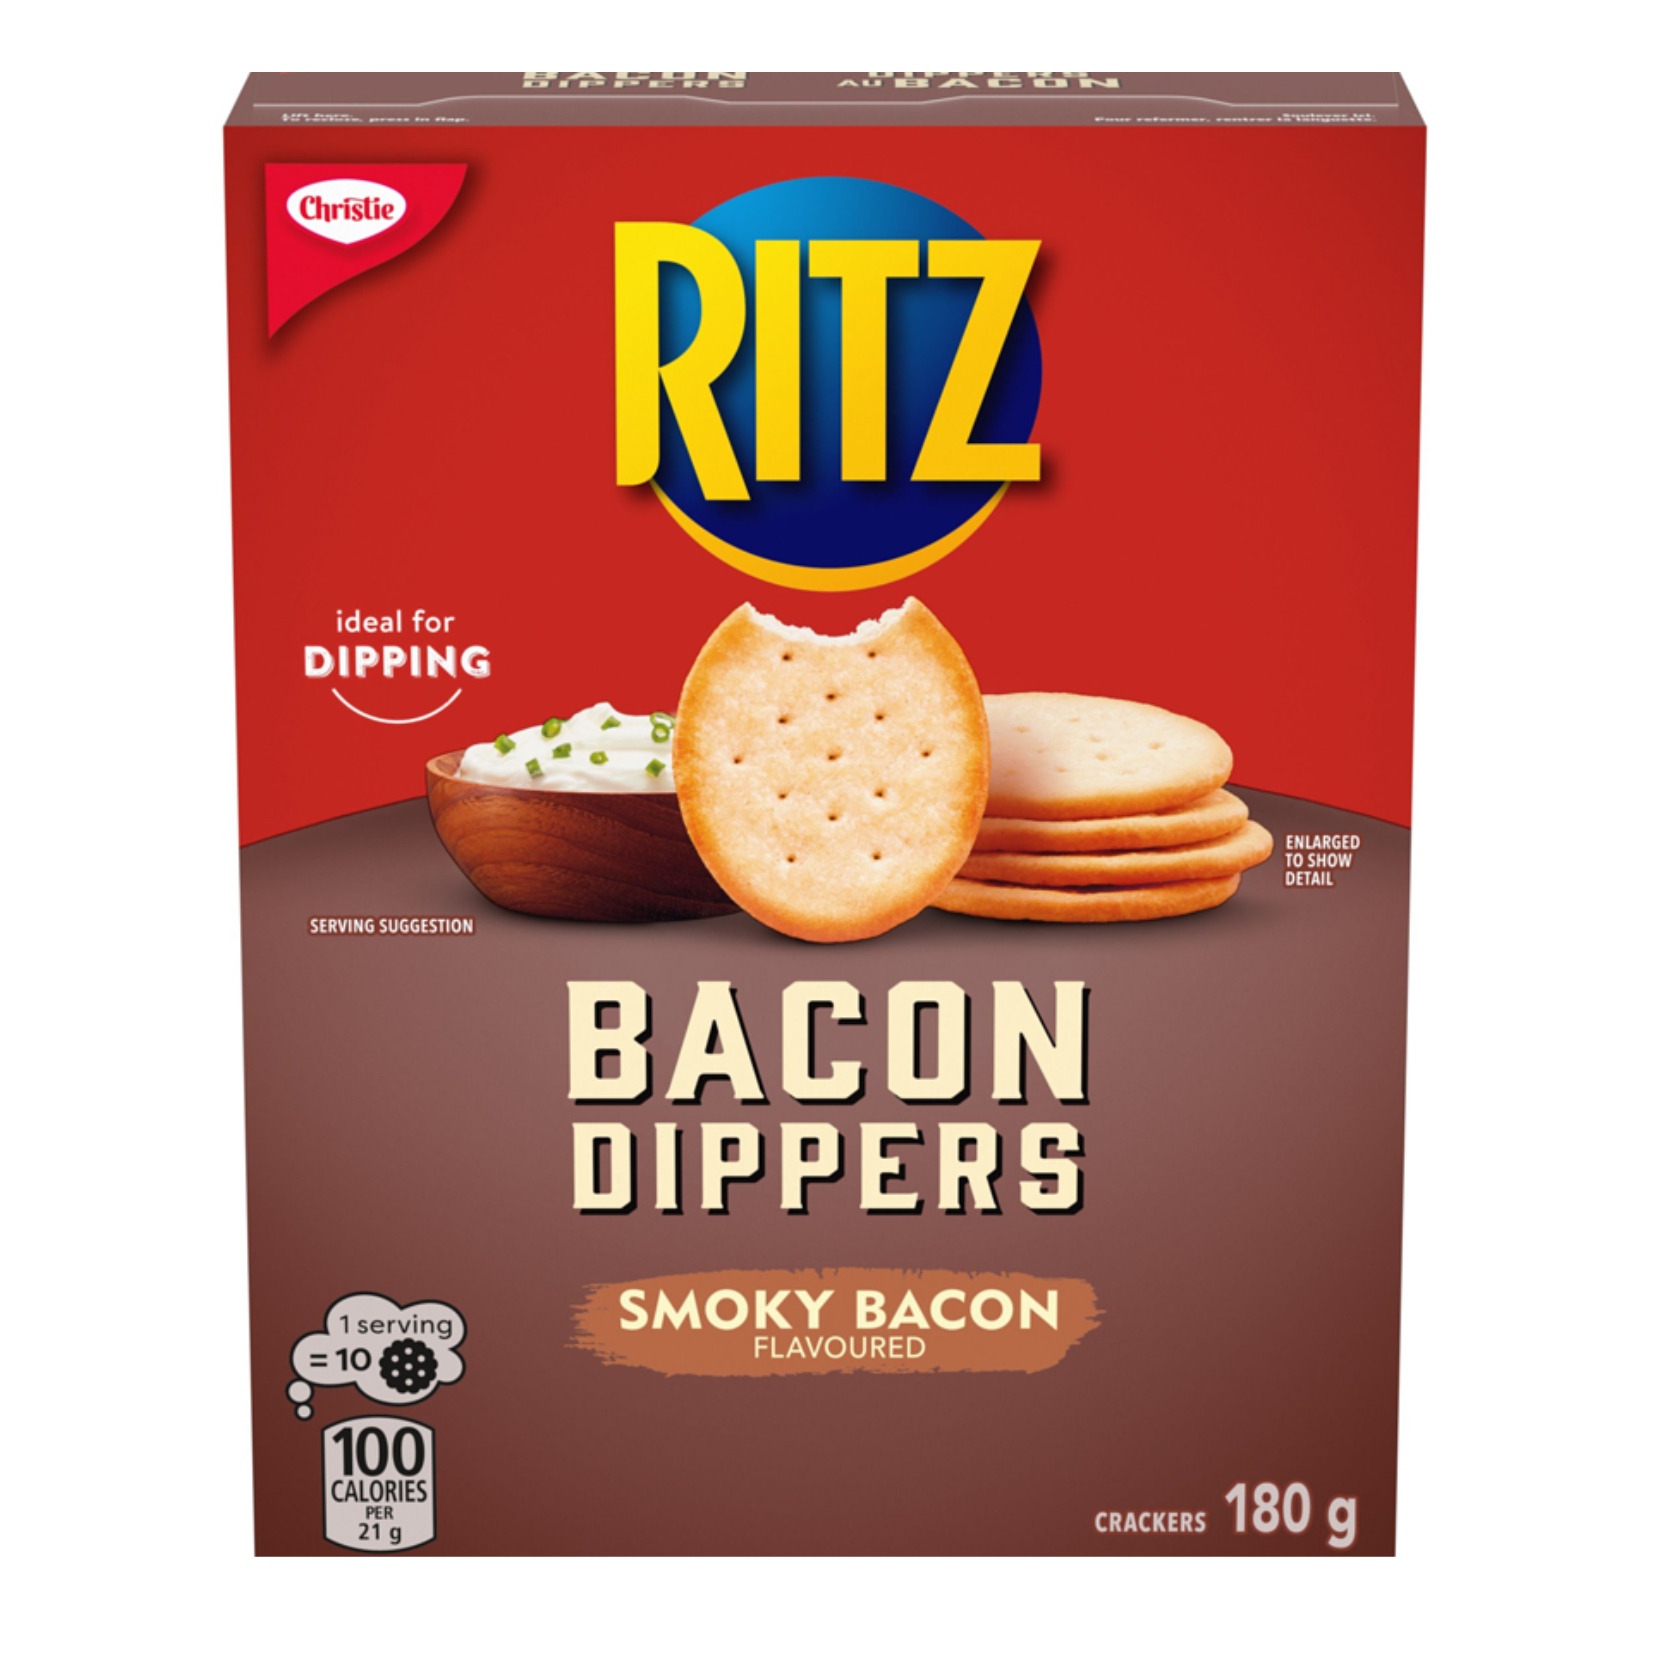 Christie Ritz Bacon Dippers Crackers 180g